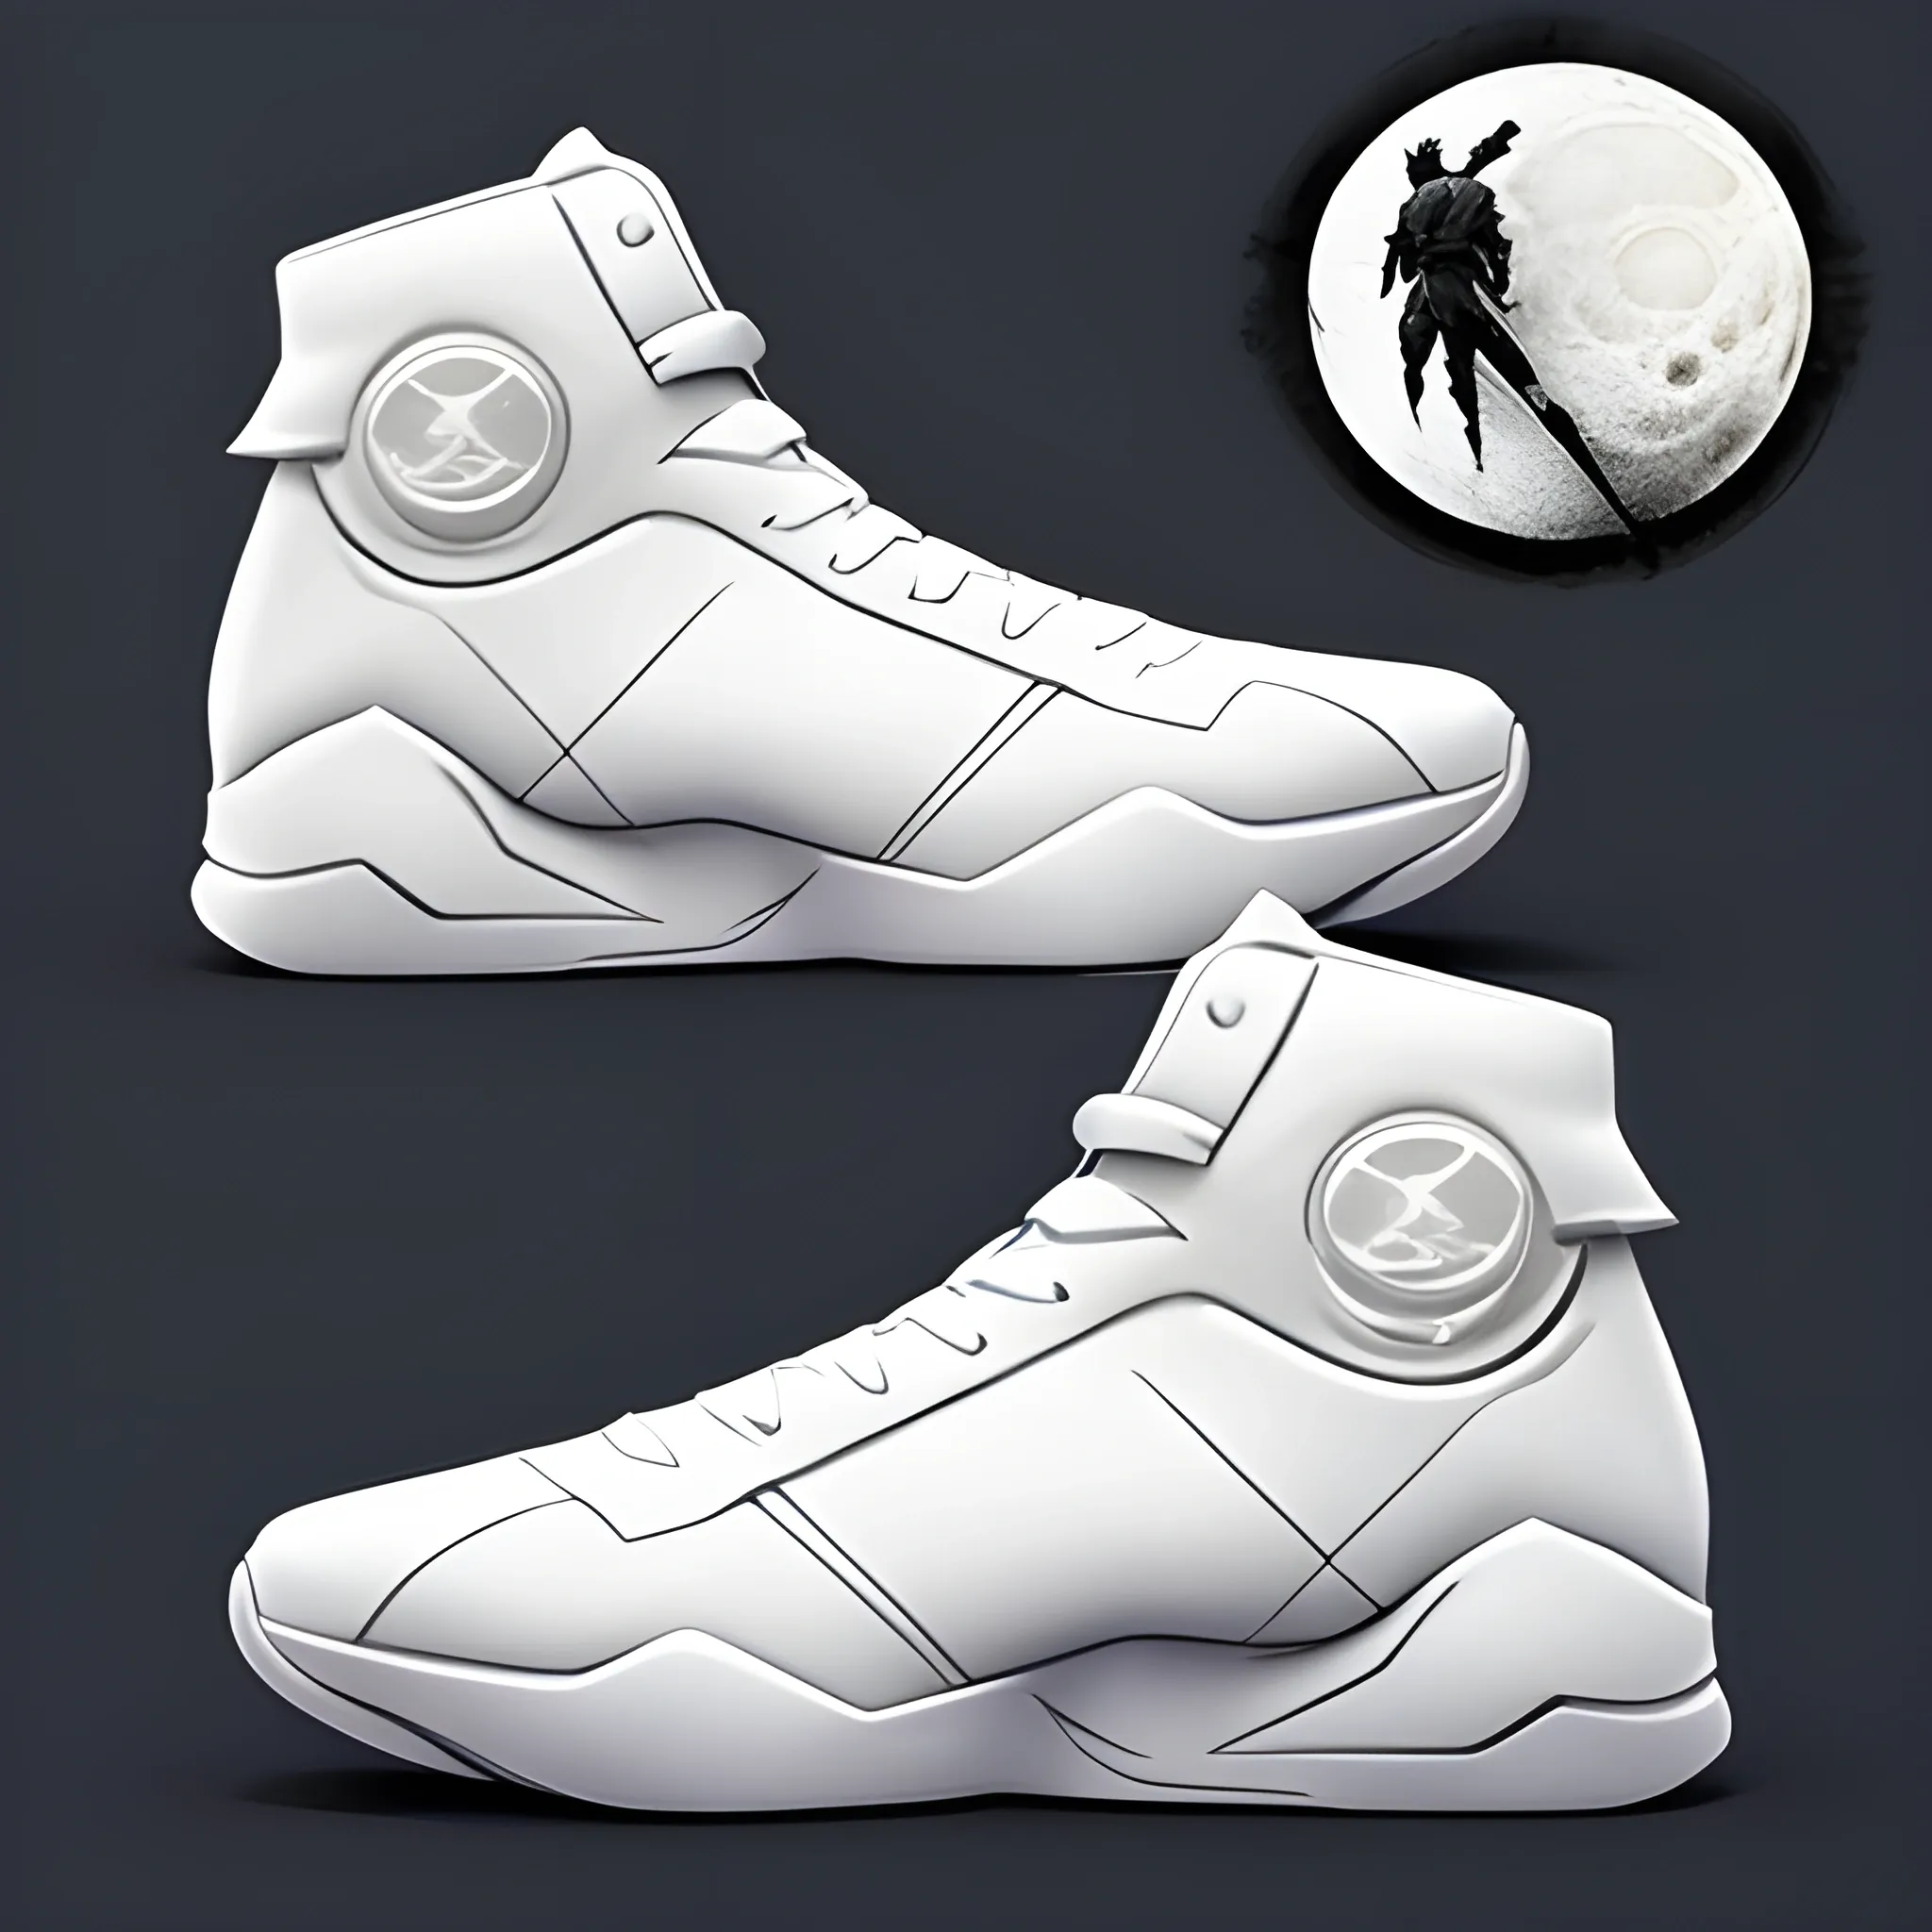 Concept Moon Knight sneakers, popular in art station, soft feeling, bloated, original, pure white, smooth, sharp focus
